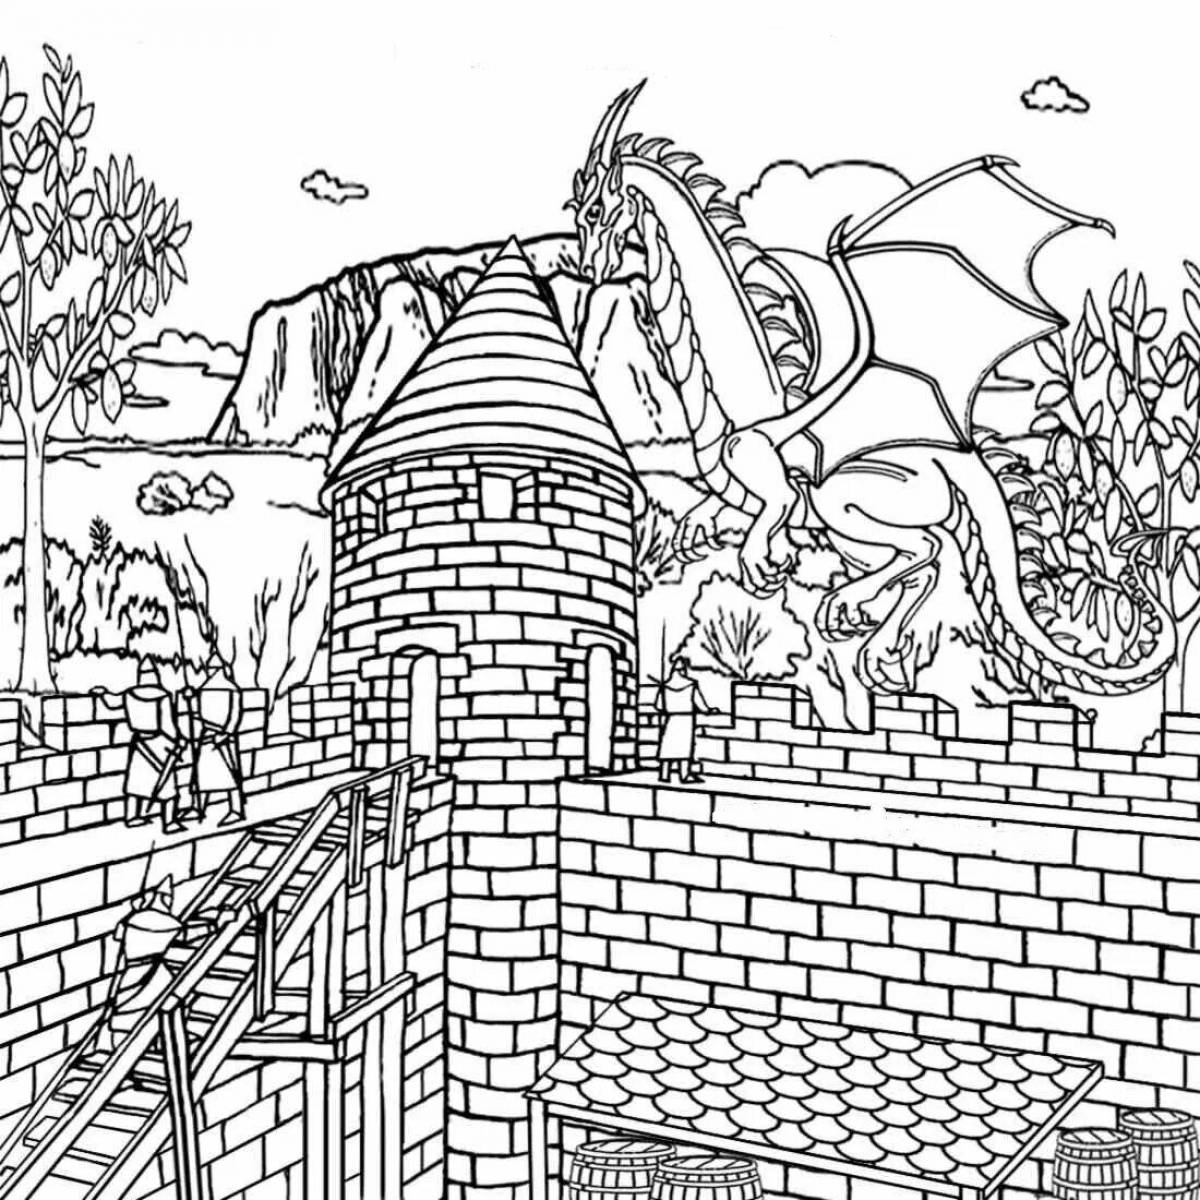 Exquisite knight and dragon coloring page